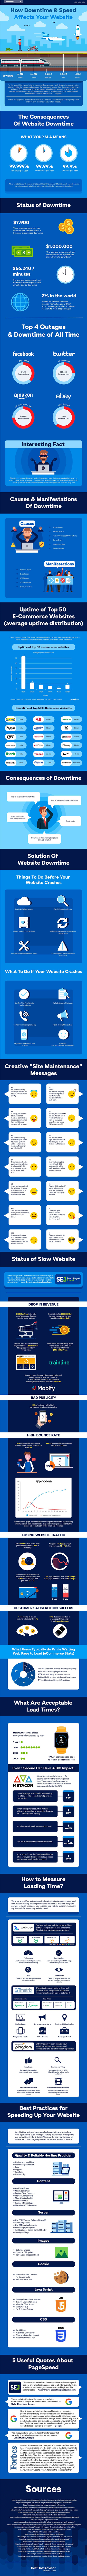 Downtime & Speed Affects Your Website